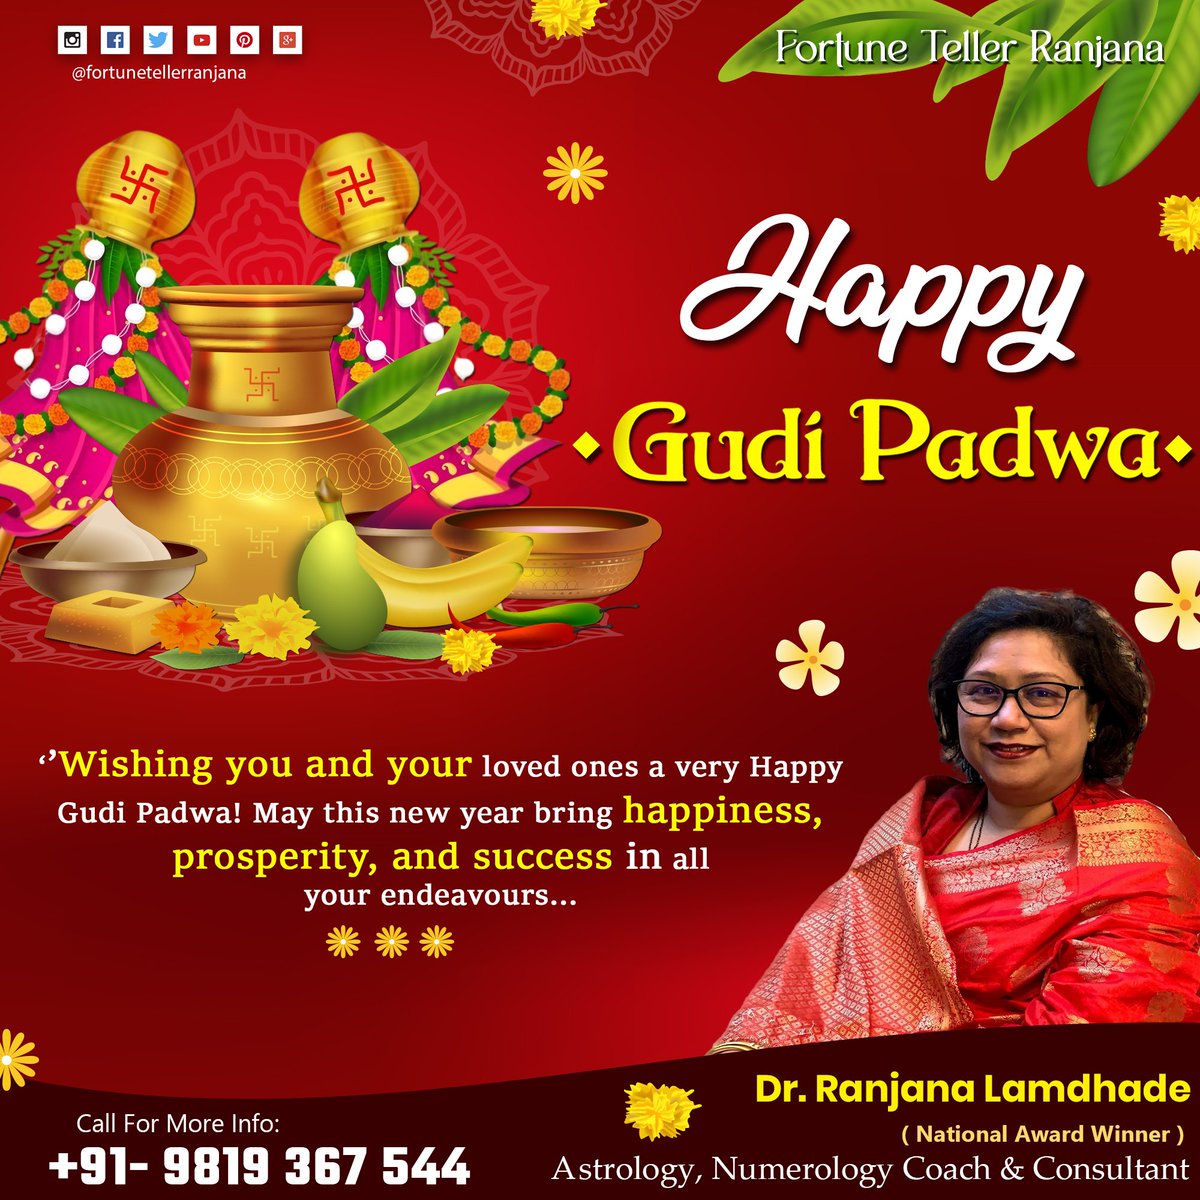 𝗛𝗔𝗣𝗣𝗬 𝗚𝗨𝗗𝗜 𝗣𝗔𝗗𝗪𝗔
‘’Wishing you and your loved ones a very Happy Gudi Padwa! May this new year bring happiness, prosperity, and success in all
your endeavours...
.
.
.
#fortunetellerranjana #drranjnalamdhade #gudipadwa2024 #HappyGudiPadwa #MaharashtrianNewYear